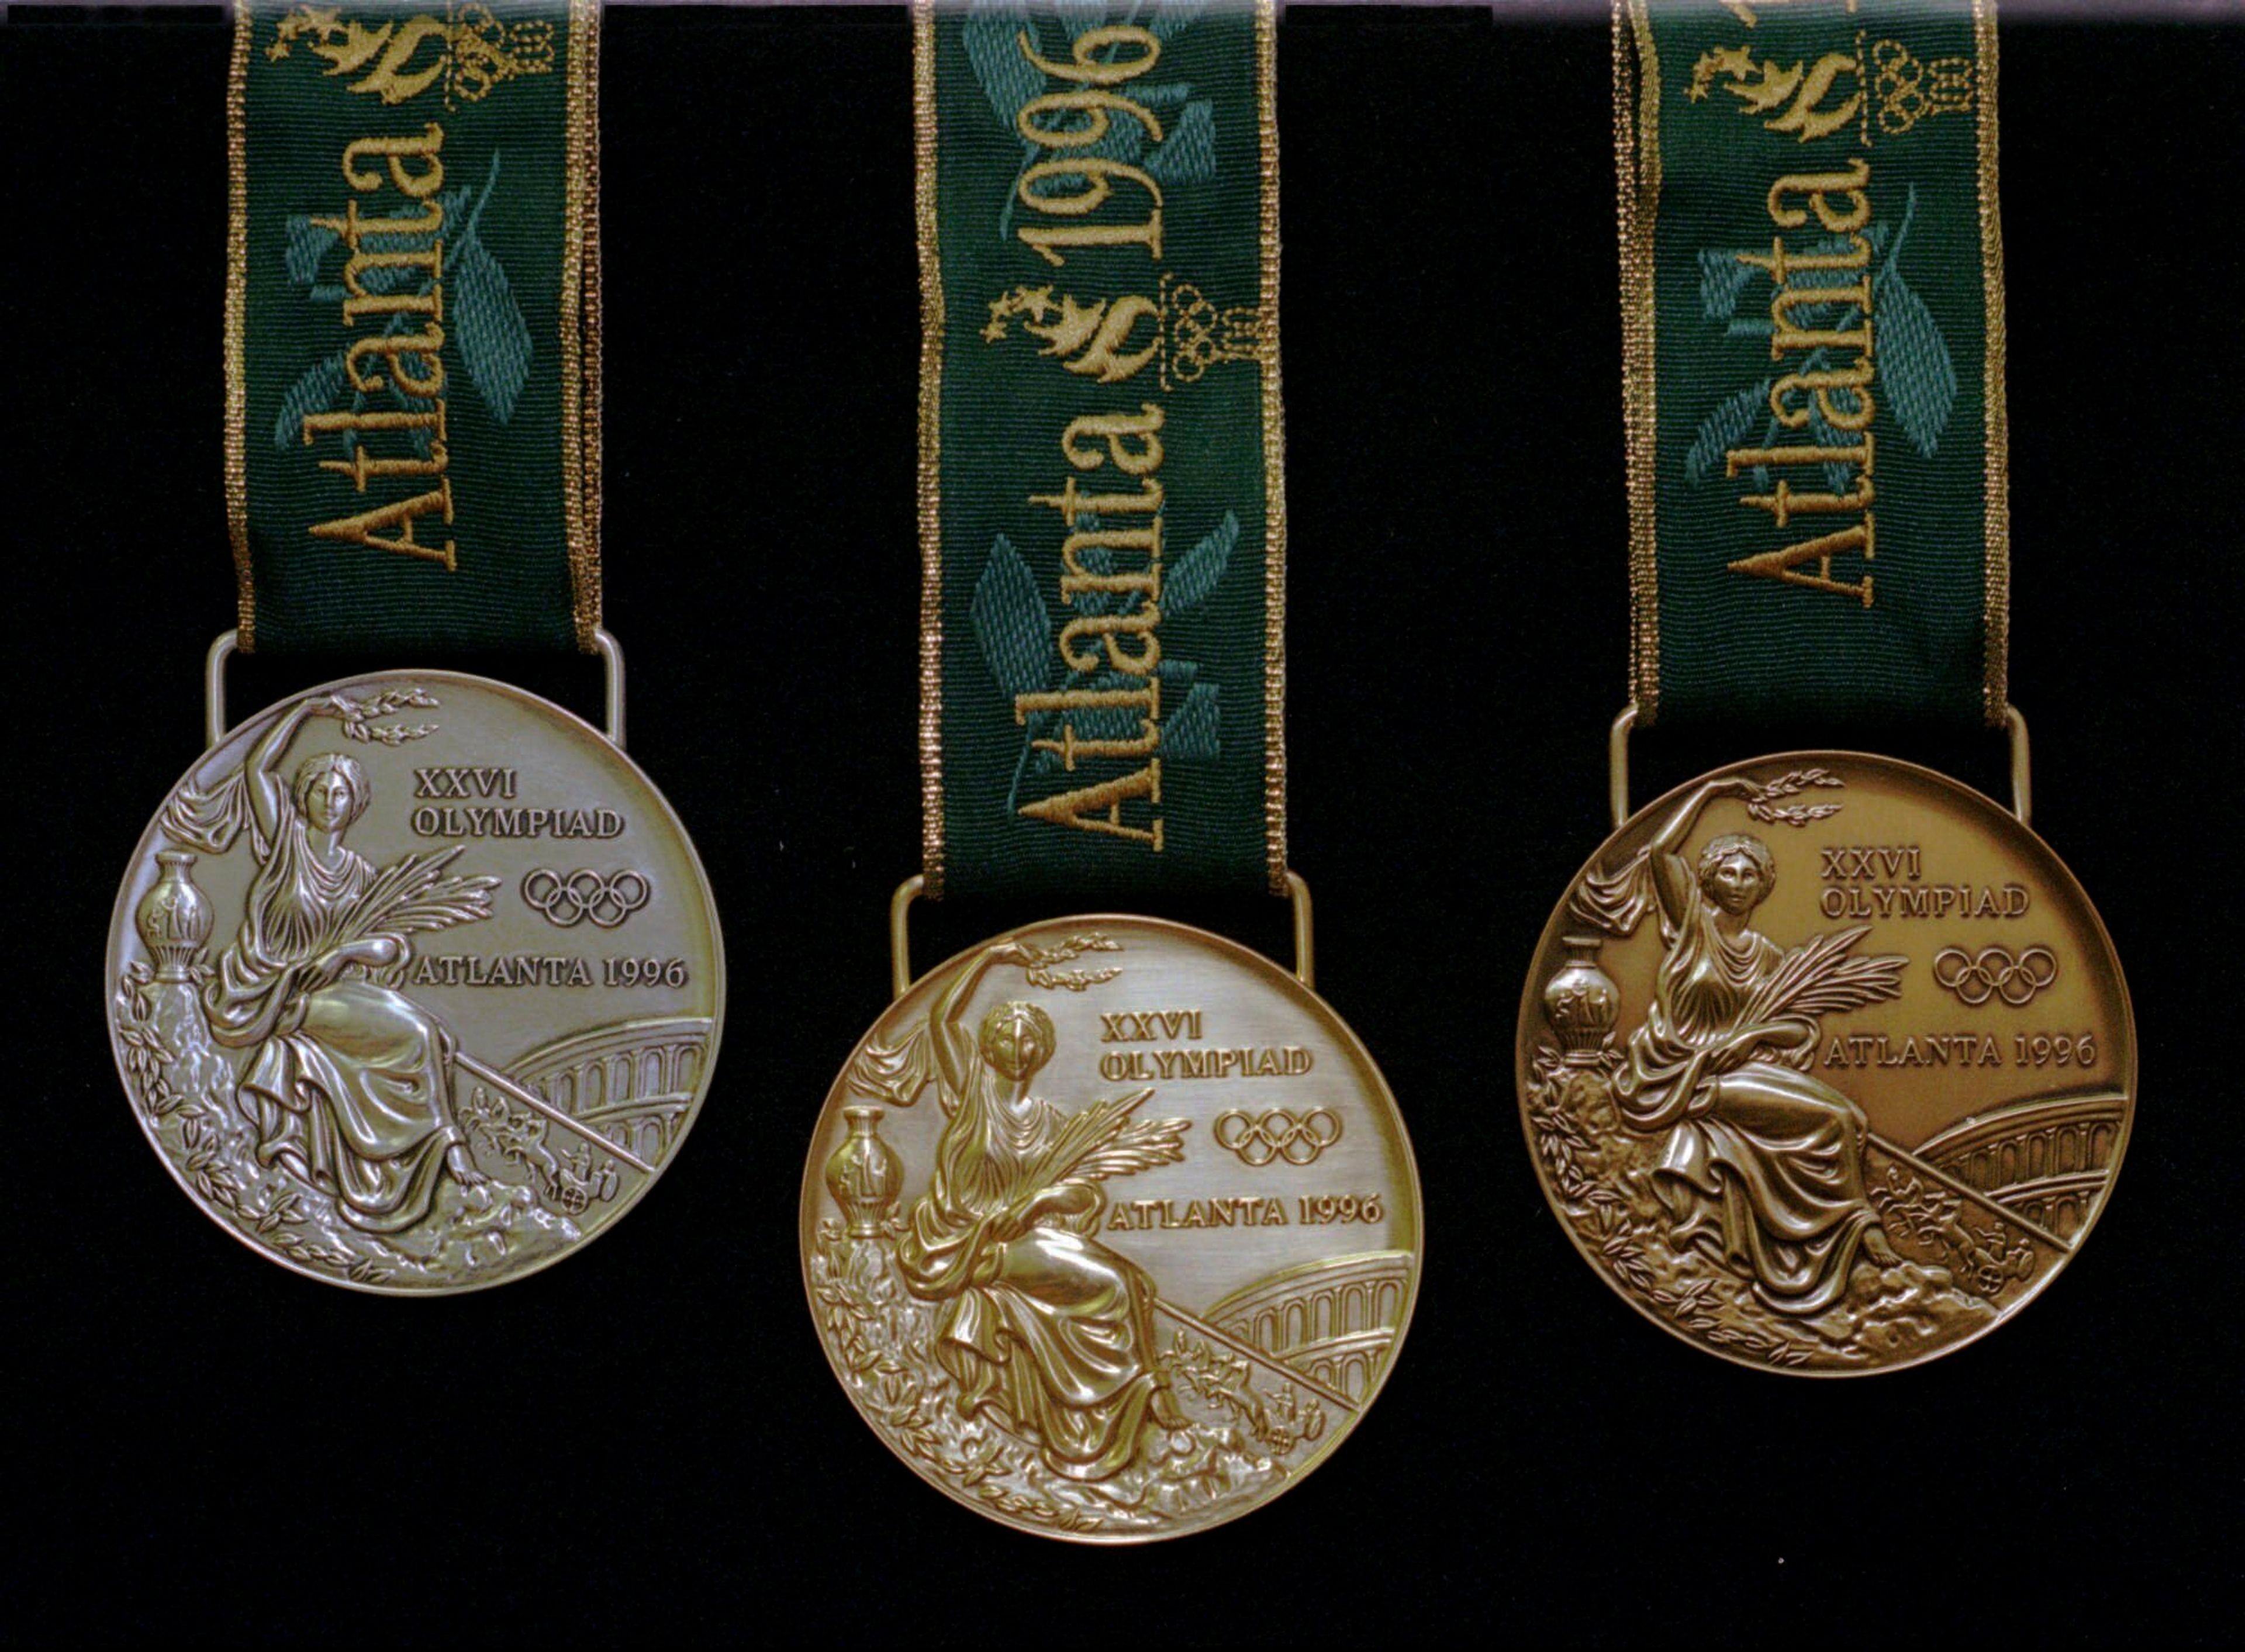 A look at Olympic medal designs at previous Summer Games 